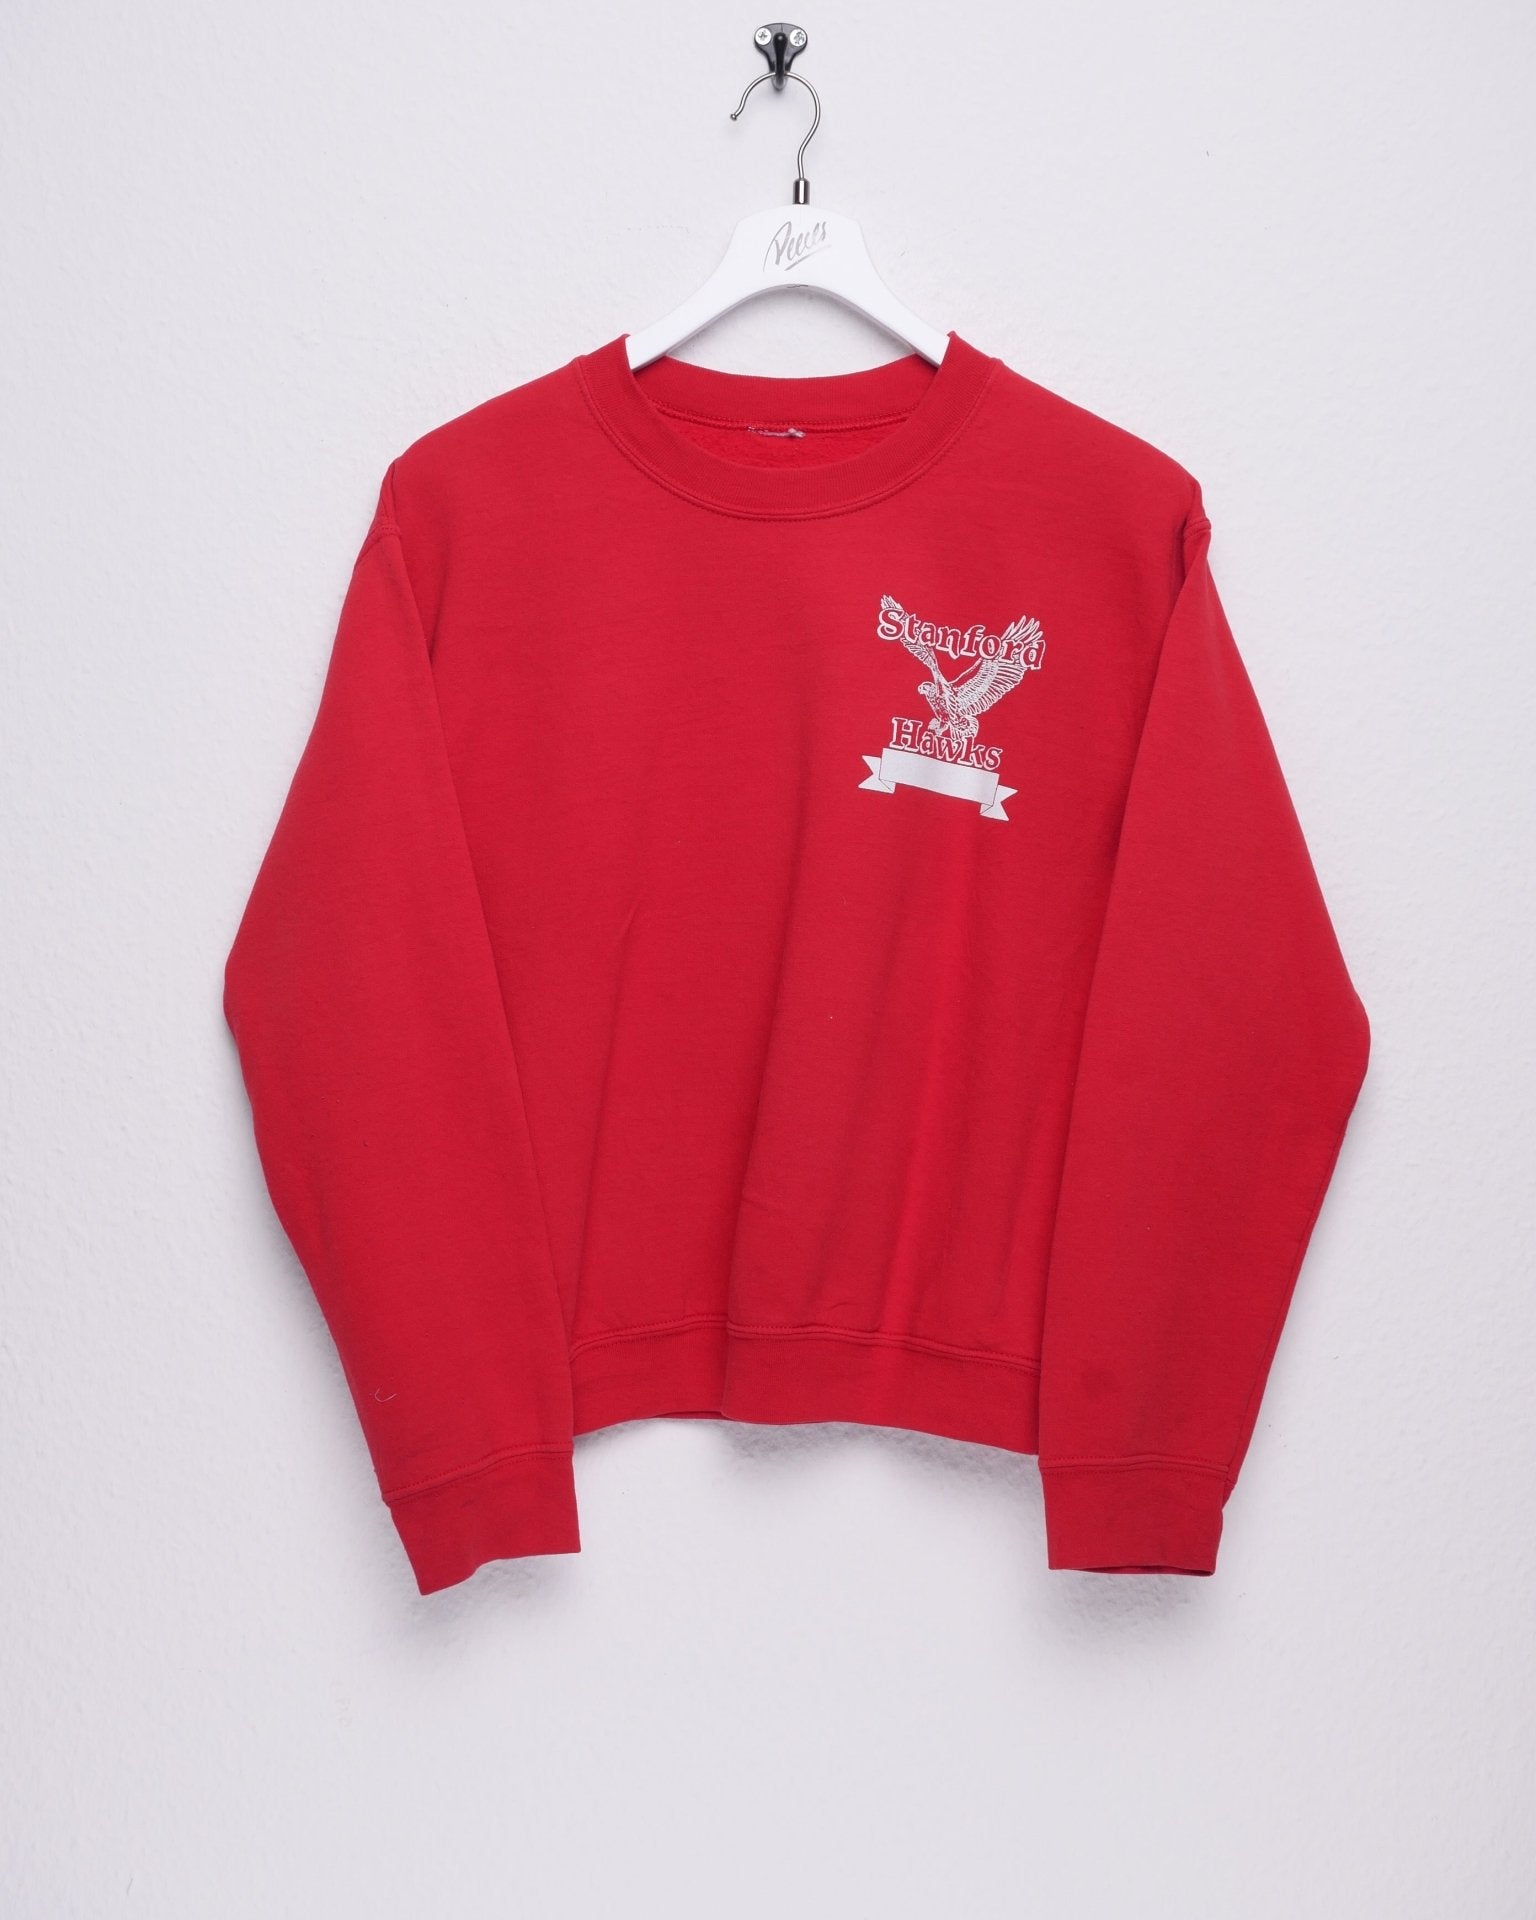 Stanford Hawks printed Logo red Sweater - Peeces